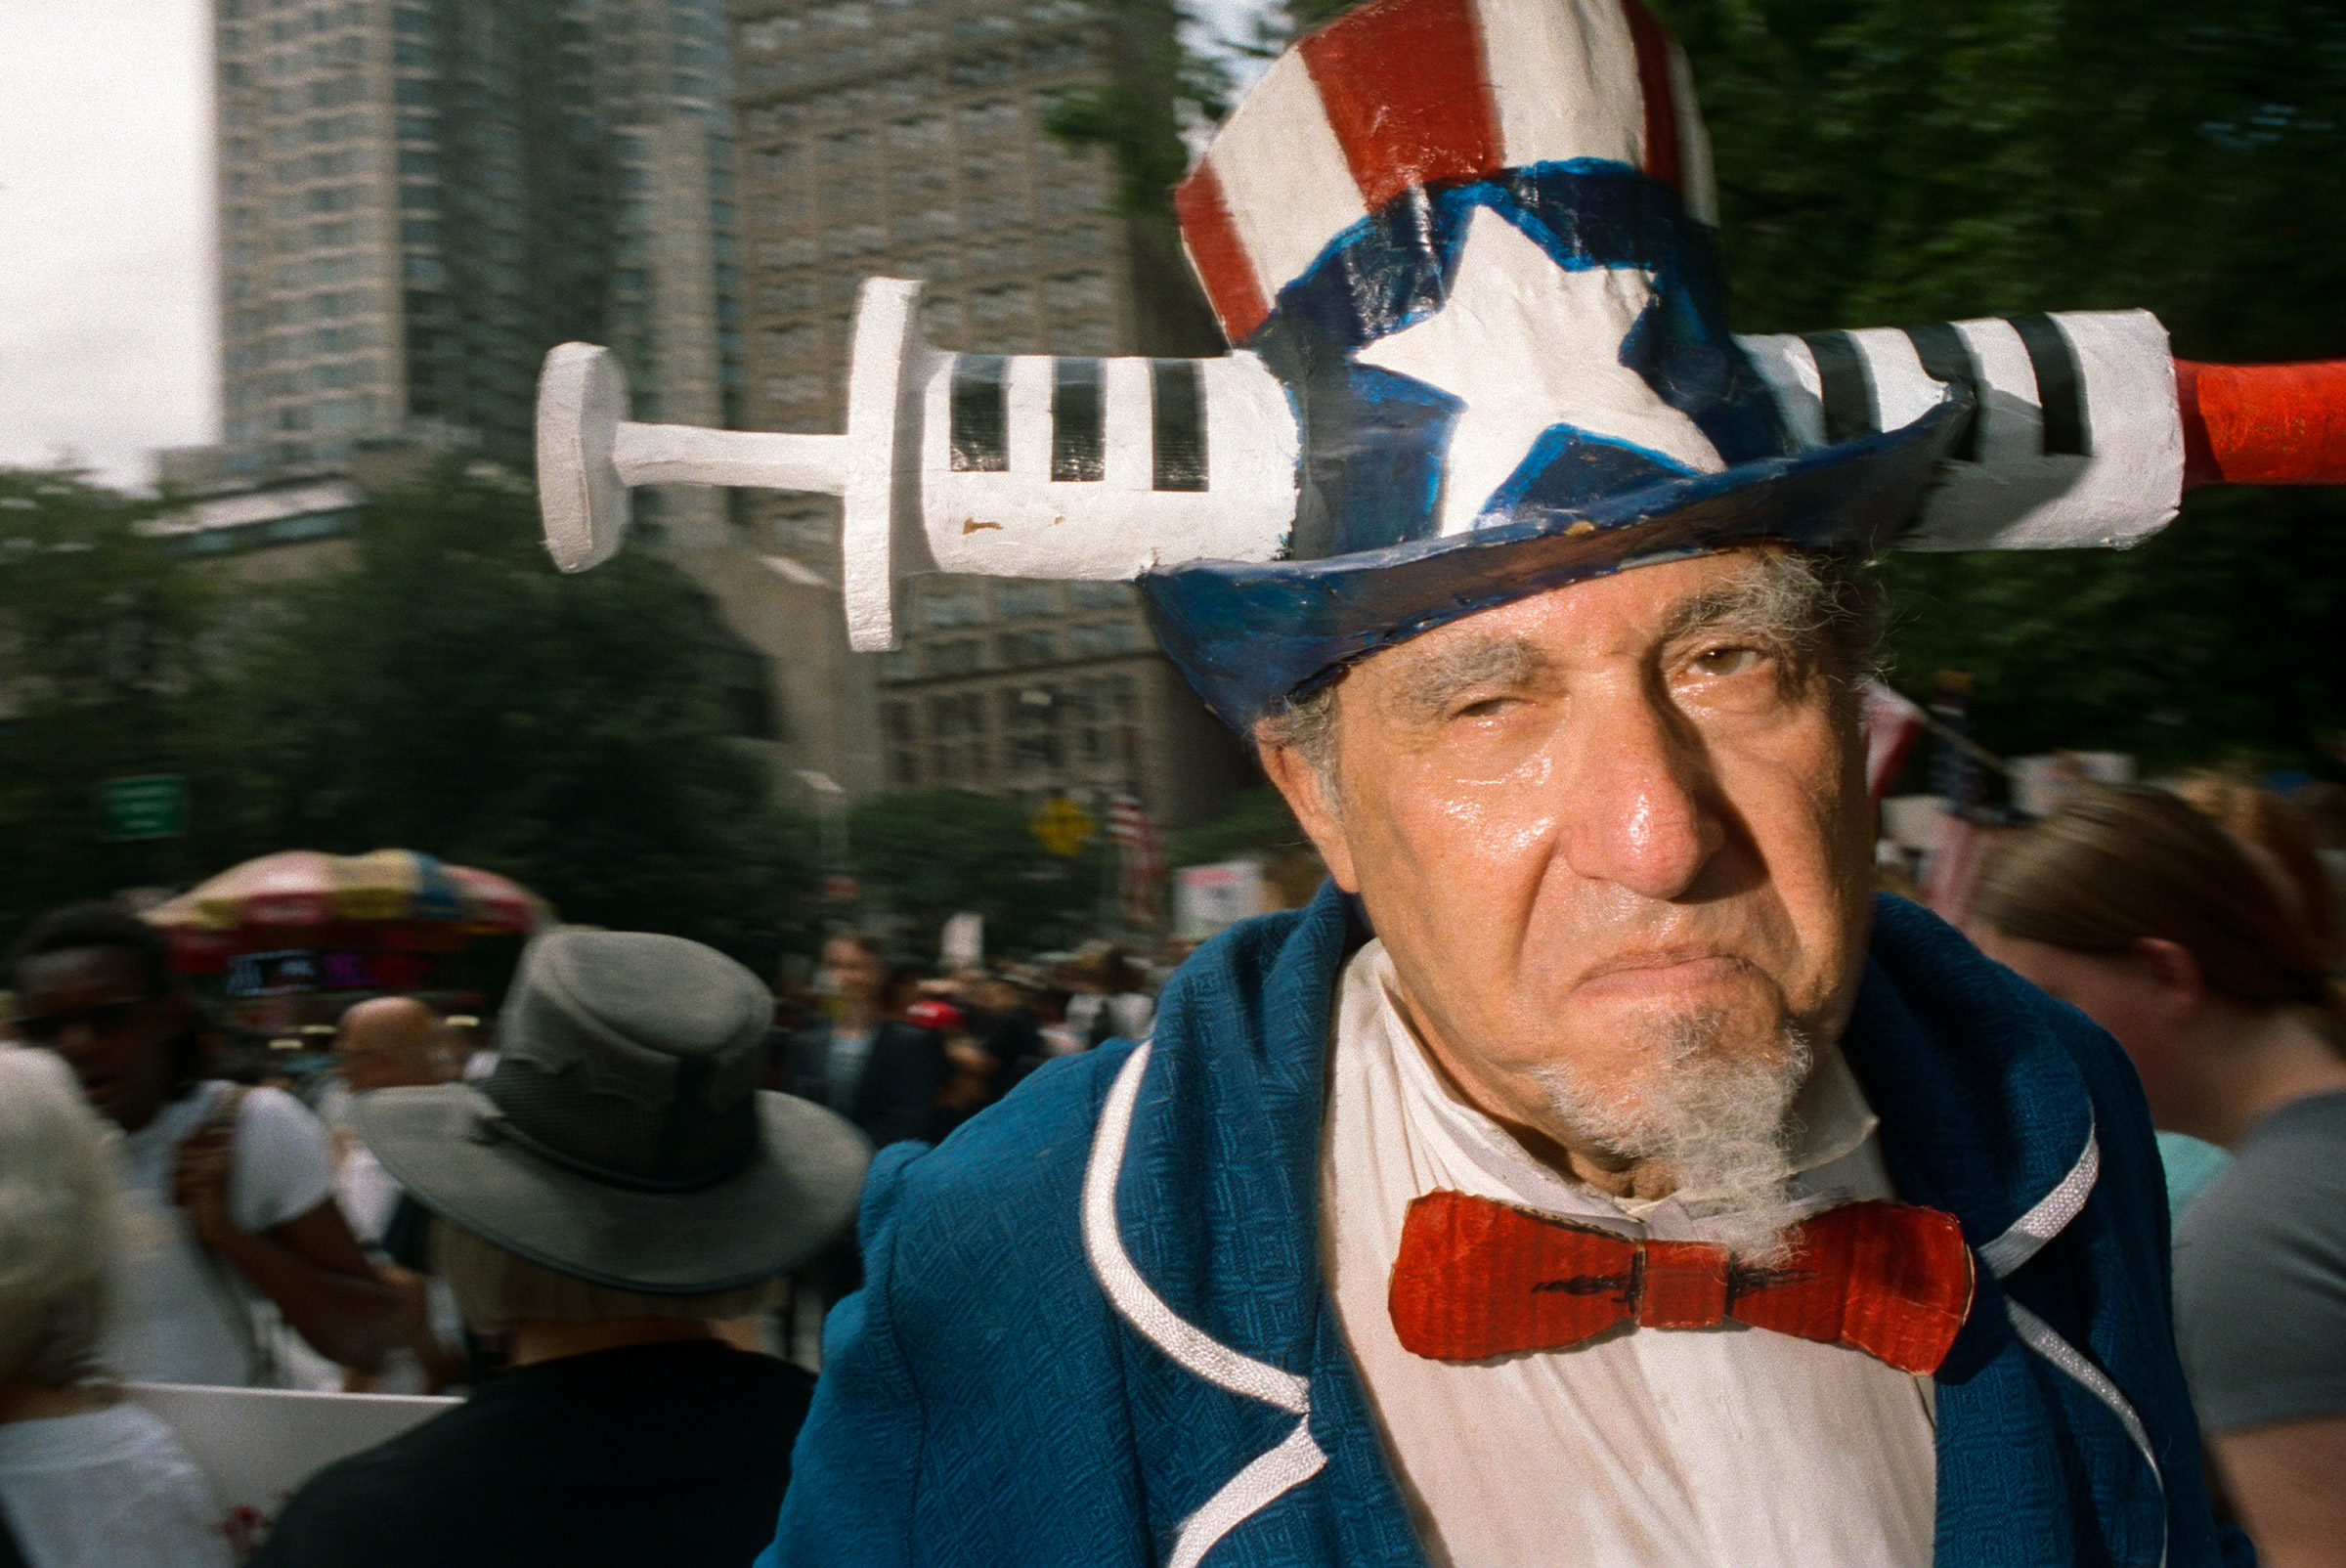 An anti-vax activist plays Uncle Sam at a City Hall protest, Aug. 11, 2021.